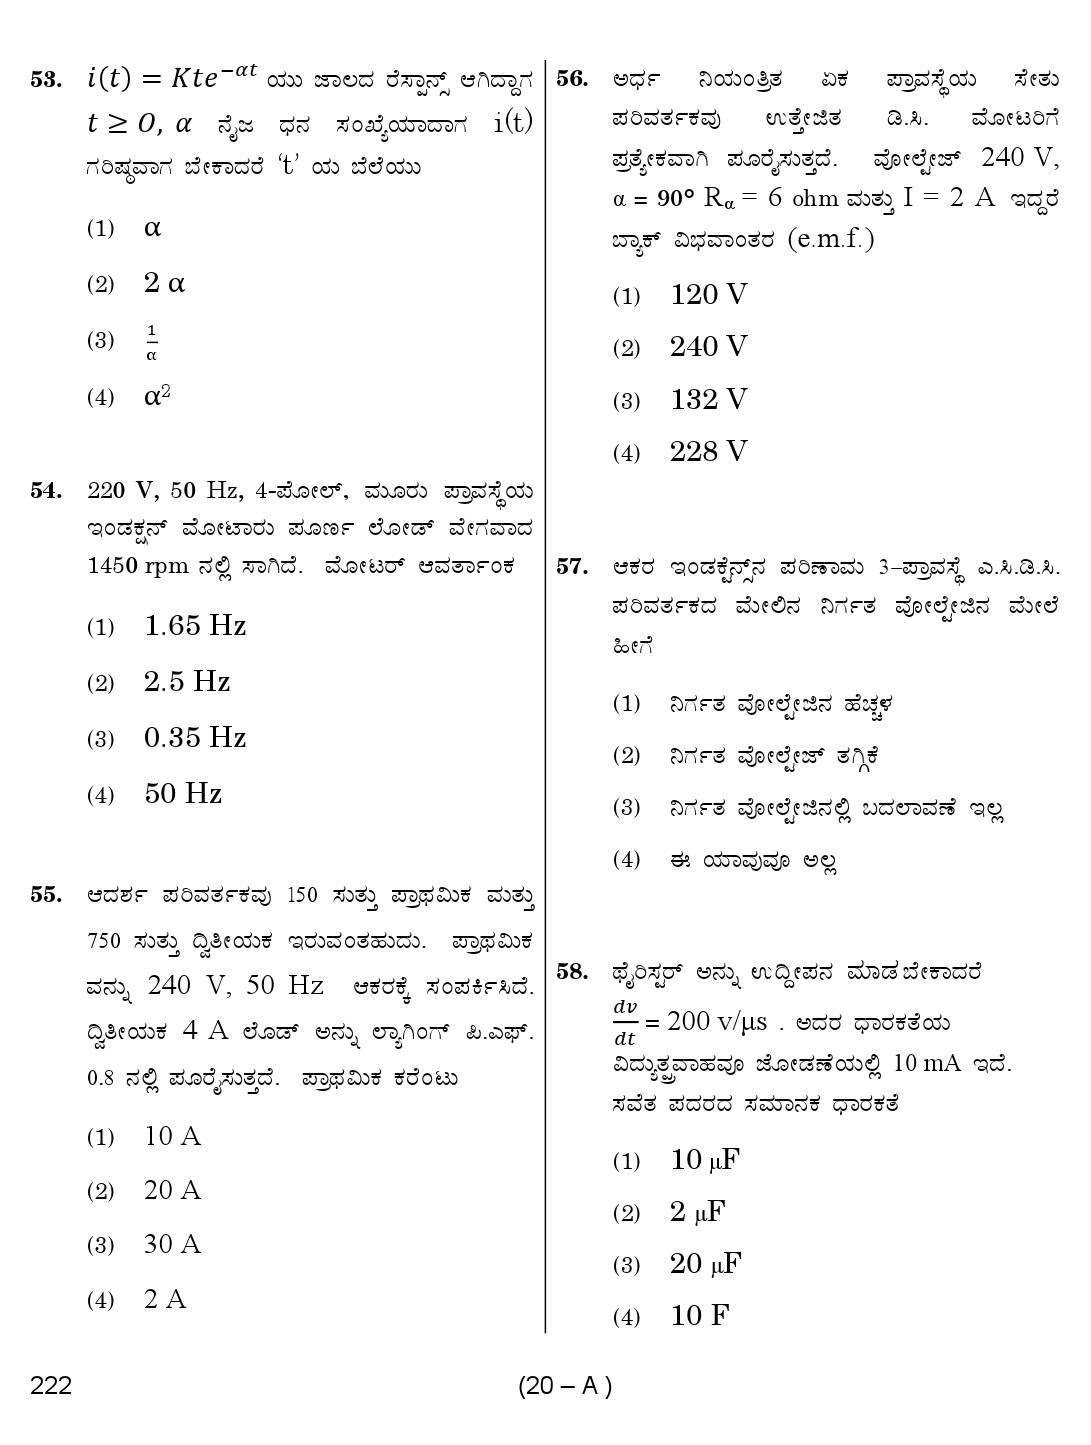 Karnataka PSC Assistant Engineer Electrical Exam Sample Question Paper 20